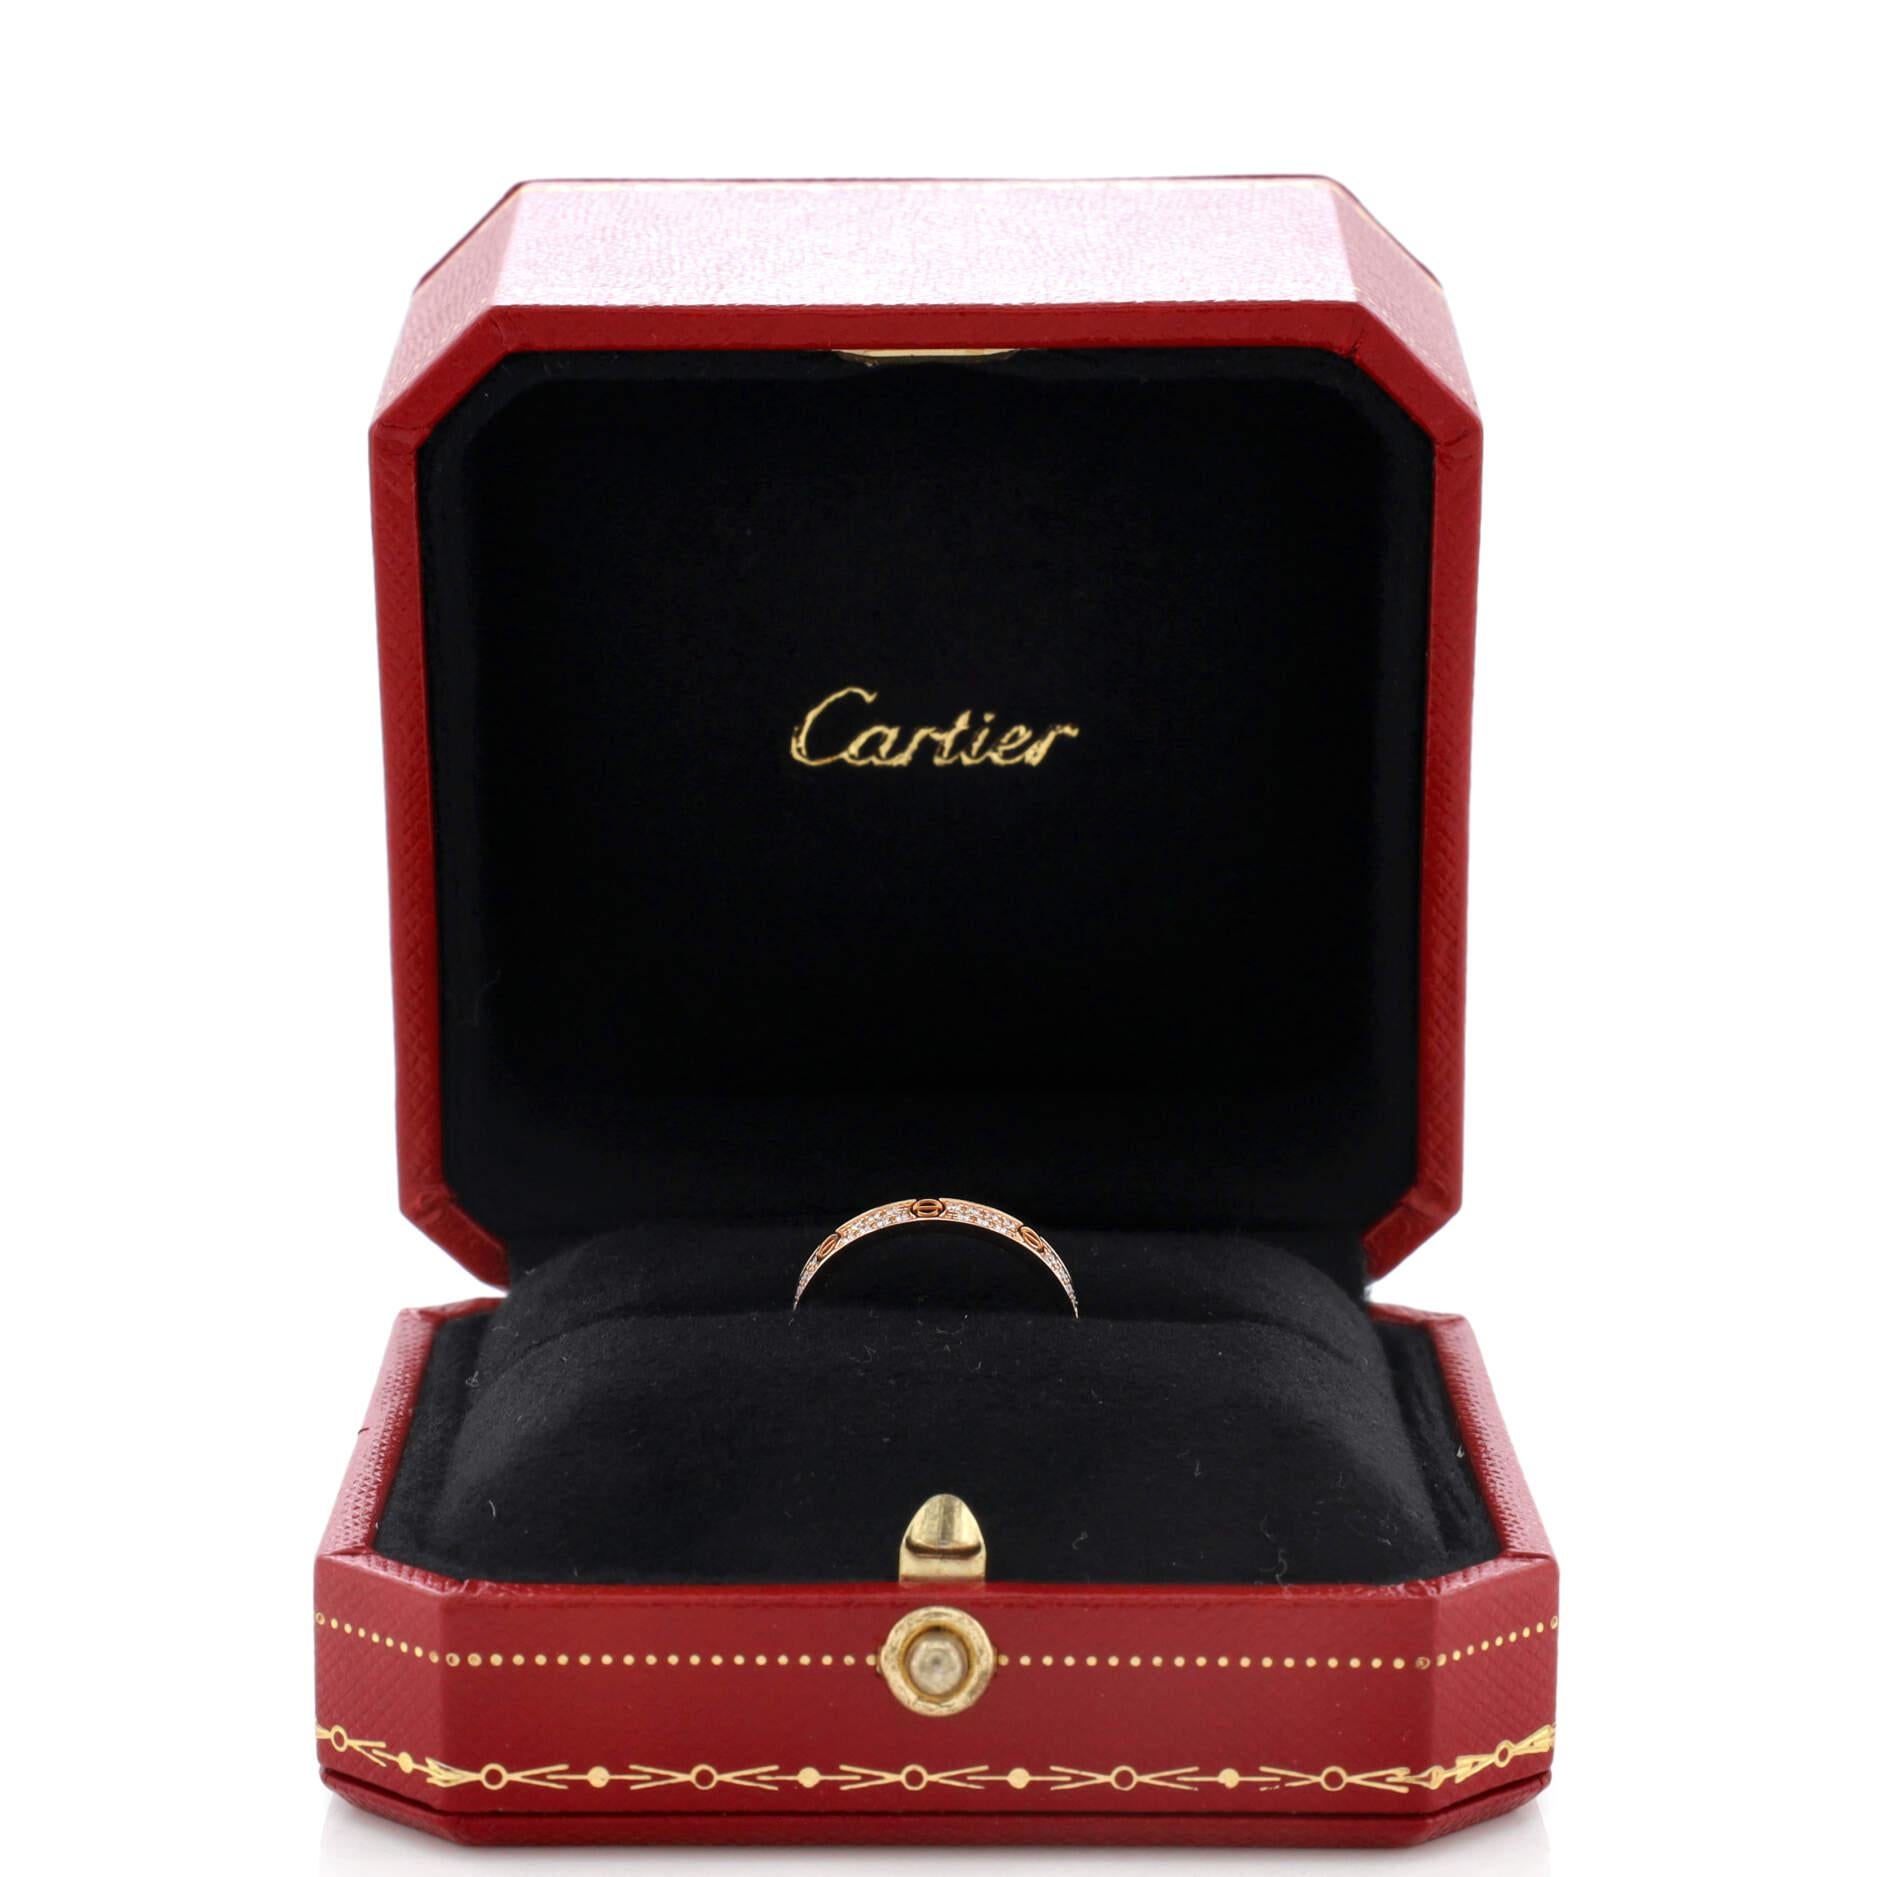 Condition: Excellent. Faint wear throughout.
Accessories: No Accessories
Measurements: Size: 5.75 - 51, Width: 2.55 mm
Designer: Cartier
Model: Love Wedding Band Pave Diamonds Ring 18K Rose Gold and Diamonds Small
Exterior Color: Rose Gold
Item